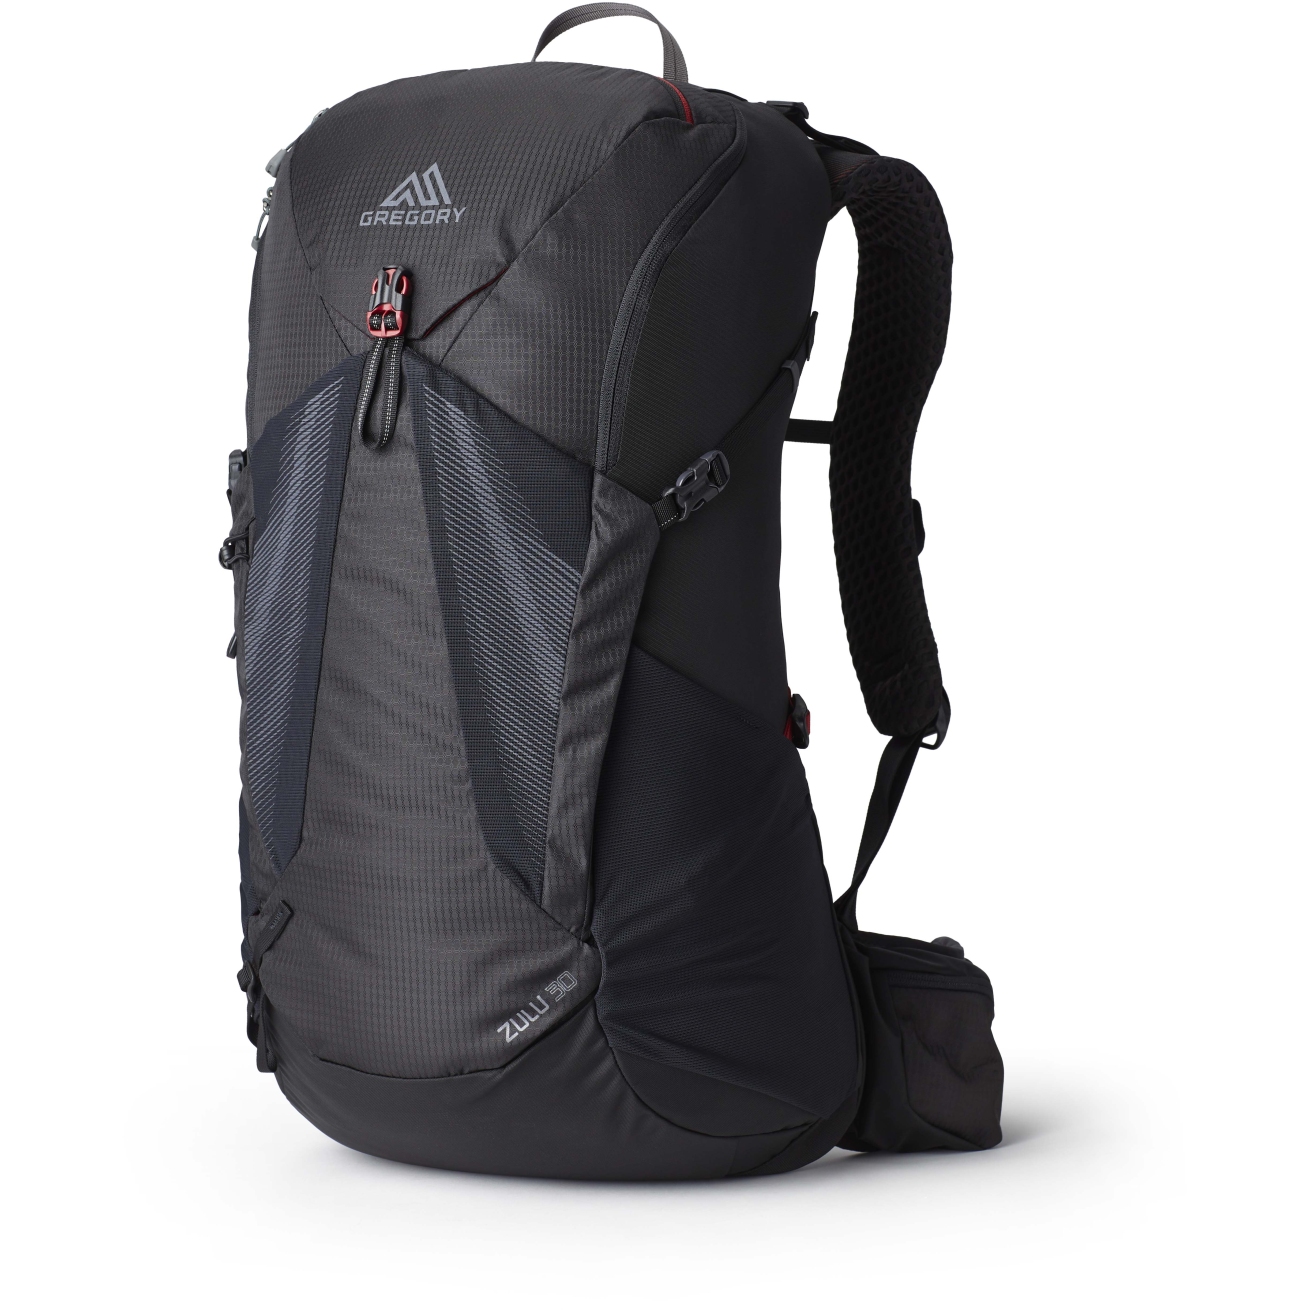 Picture of Gregory Zulu 30 Backpack - Volcanic Black